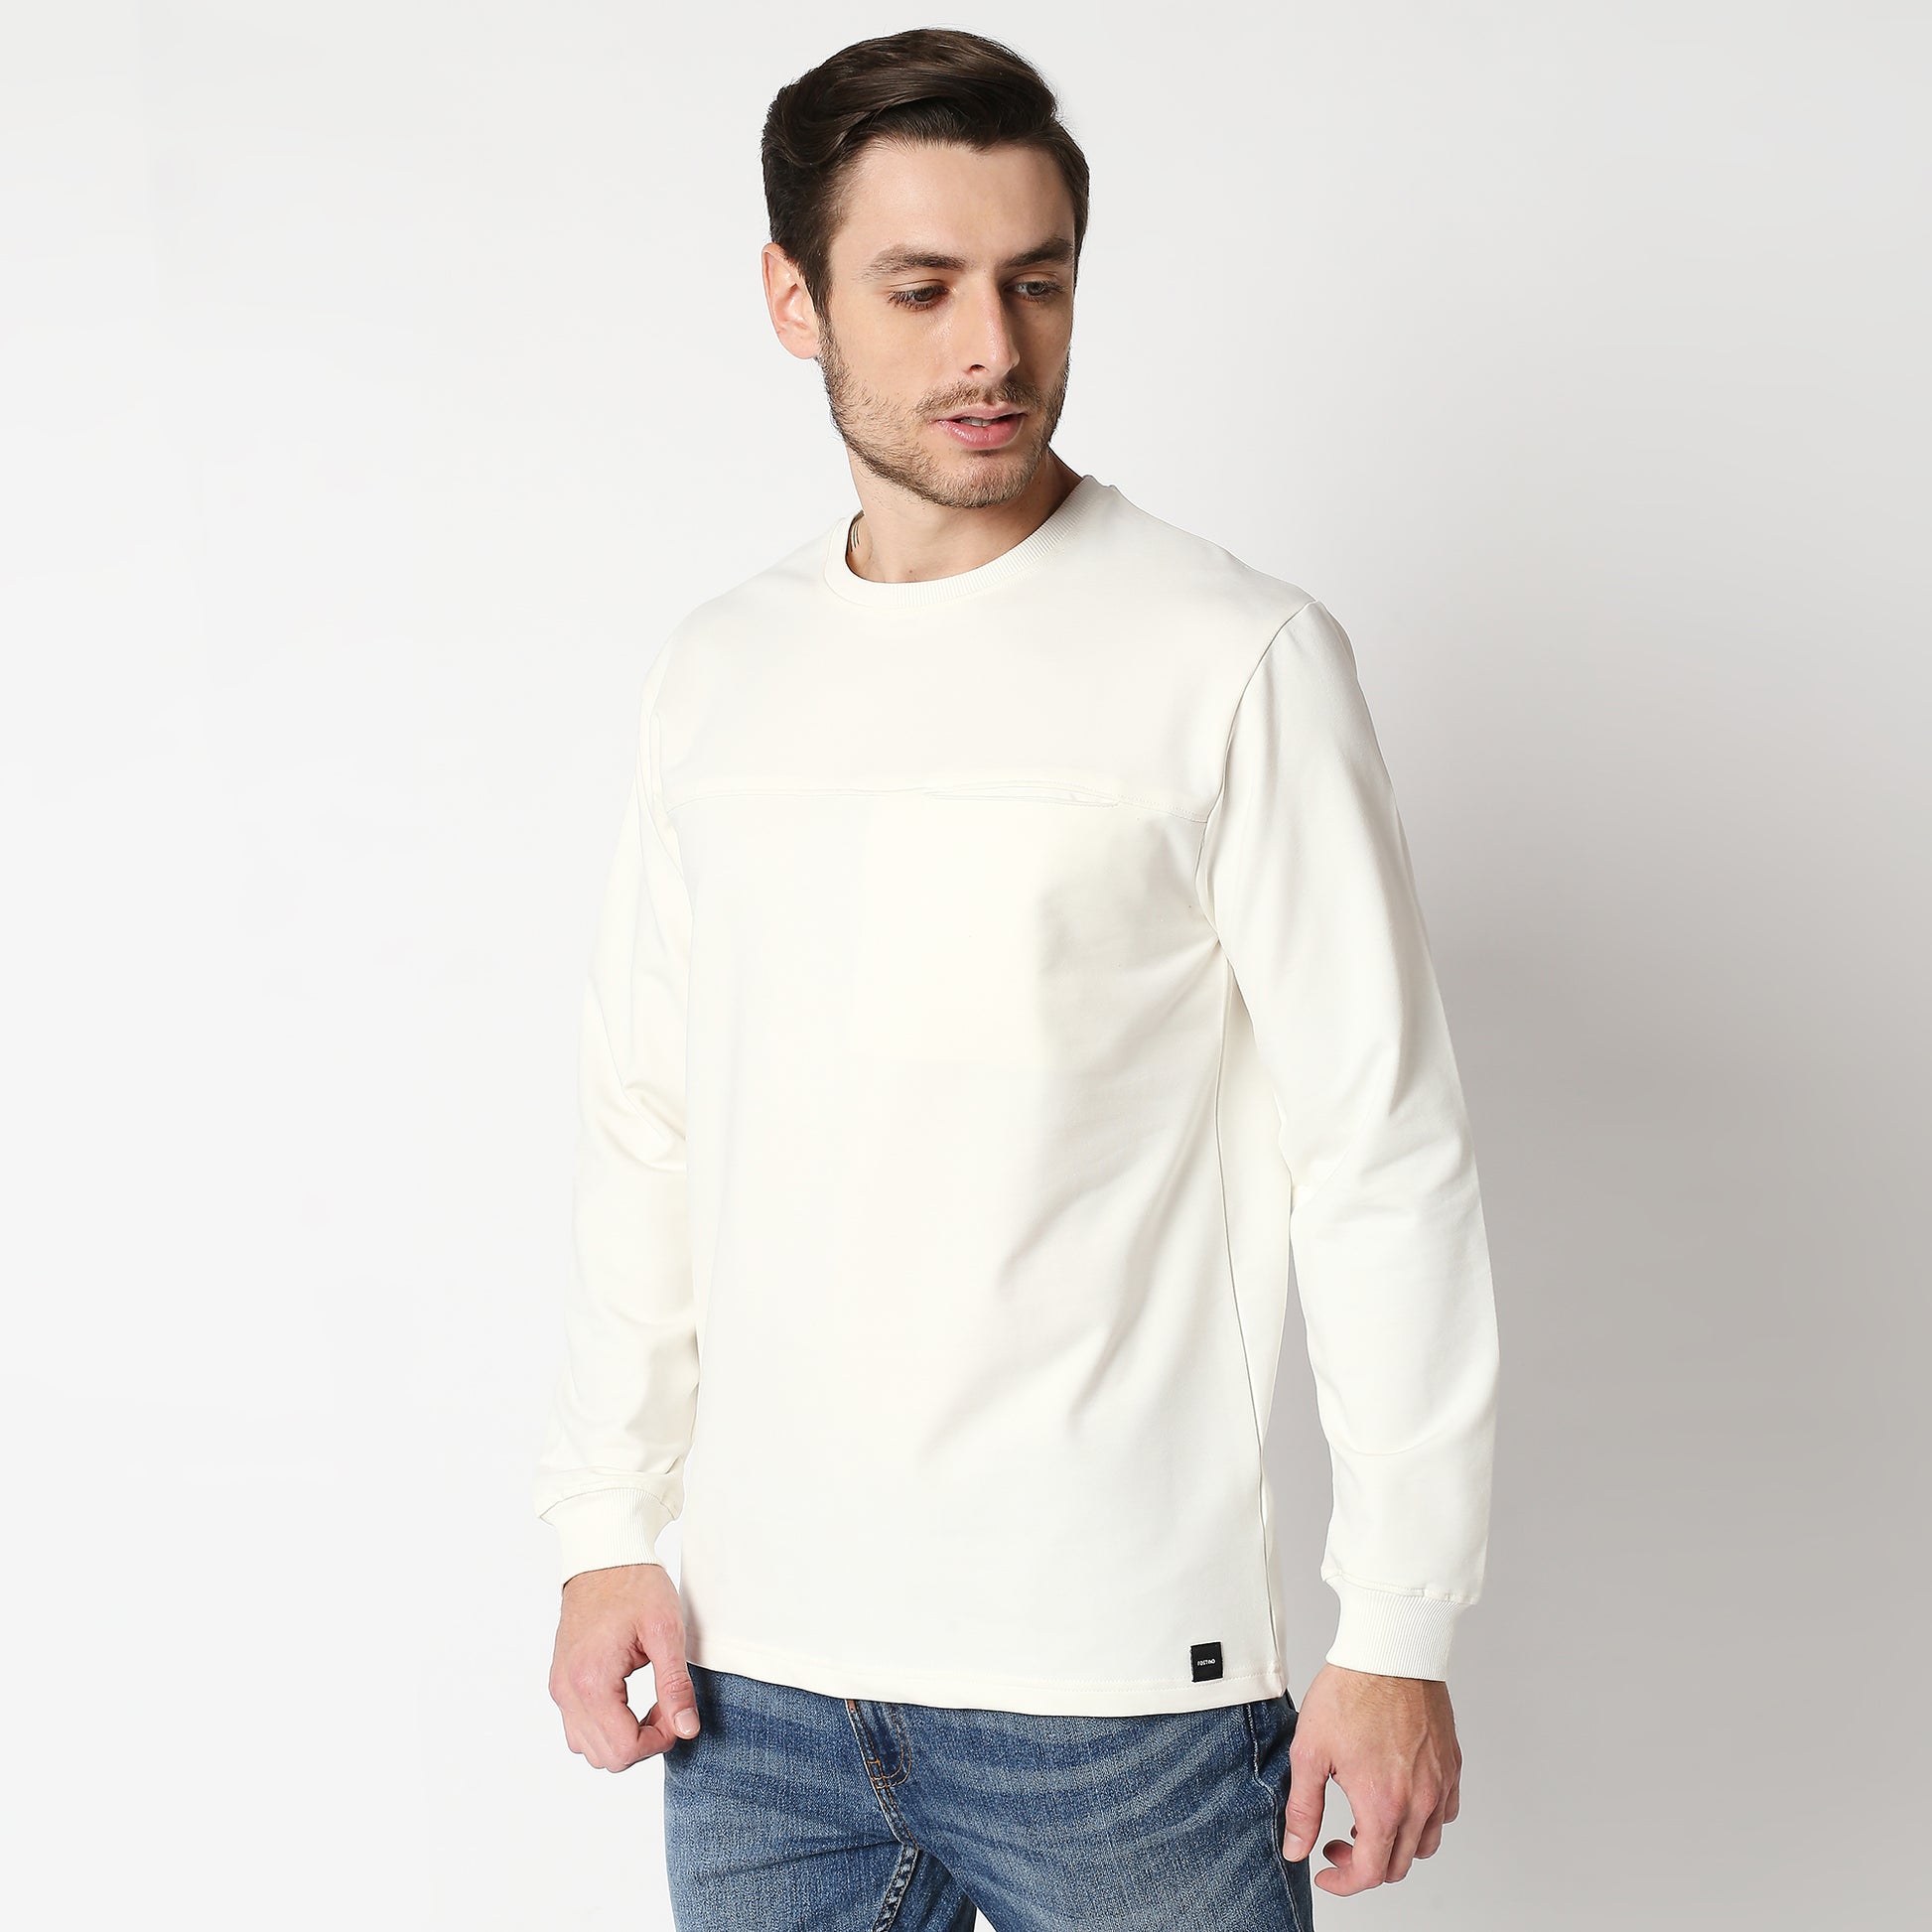 Fostino White Pullover Full Sleeves T-Shirt with Pocket - Fostino - T-Shirts